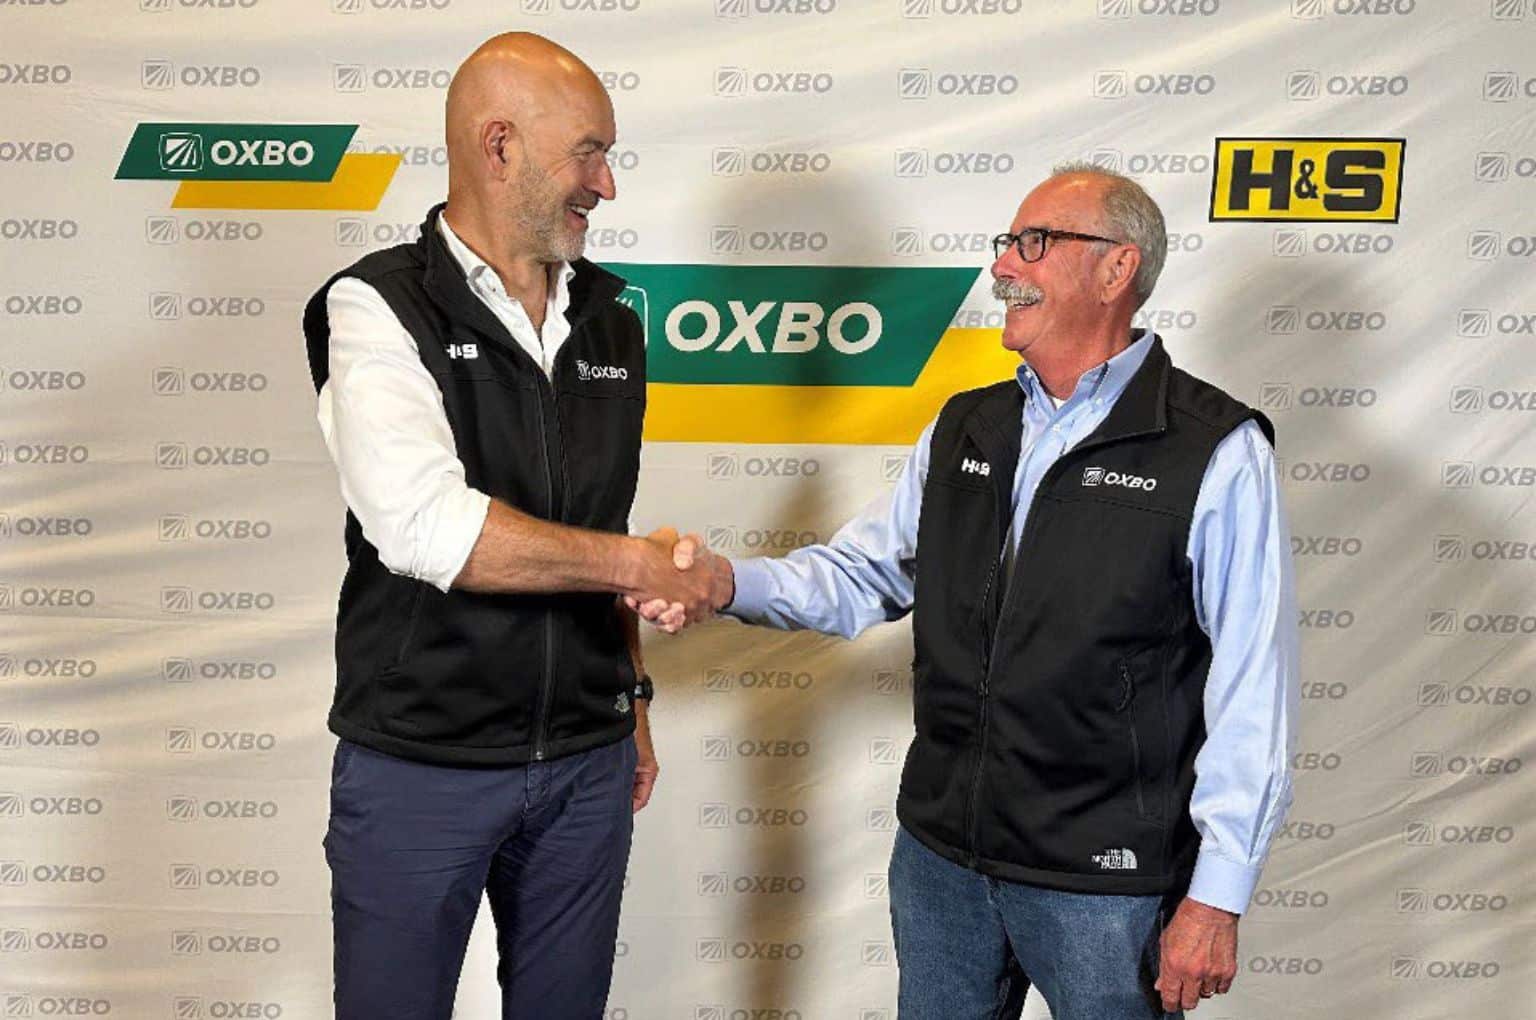 Oxbo acquires H&S Manufacturing